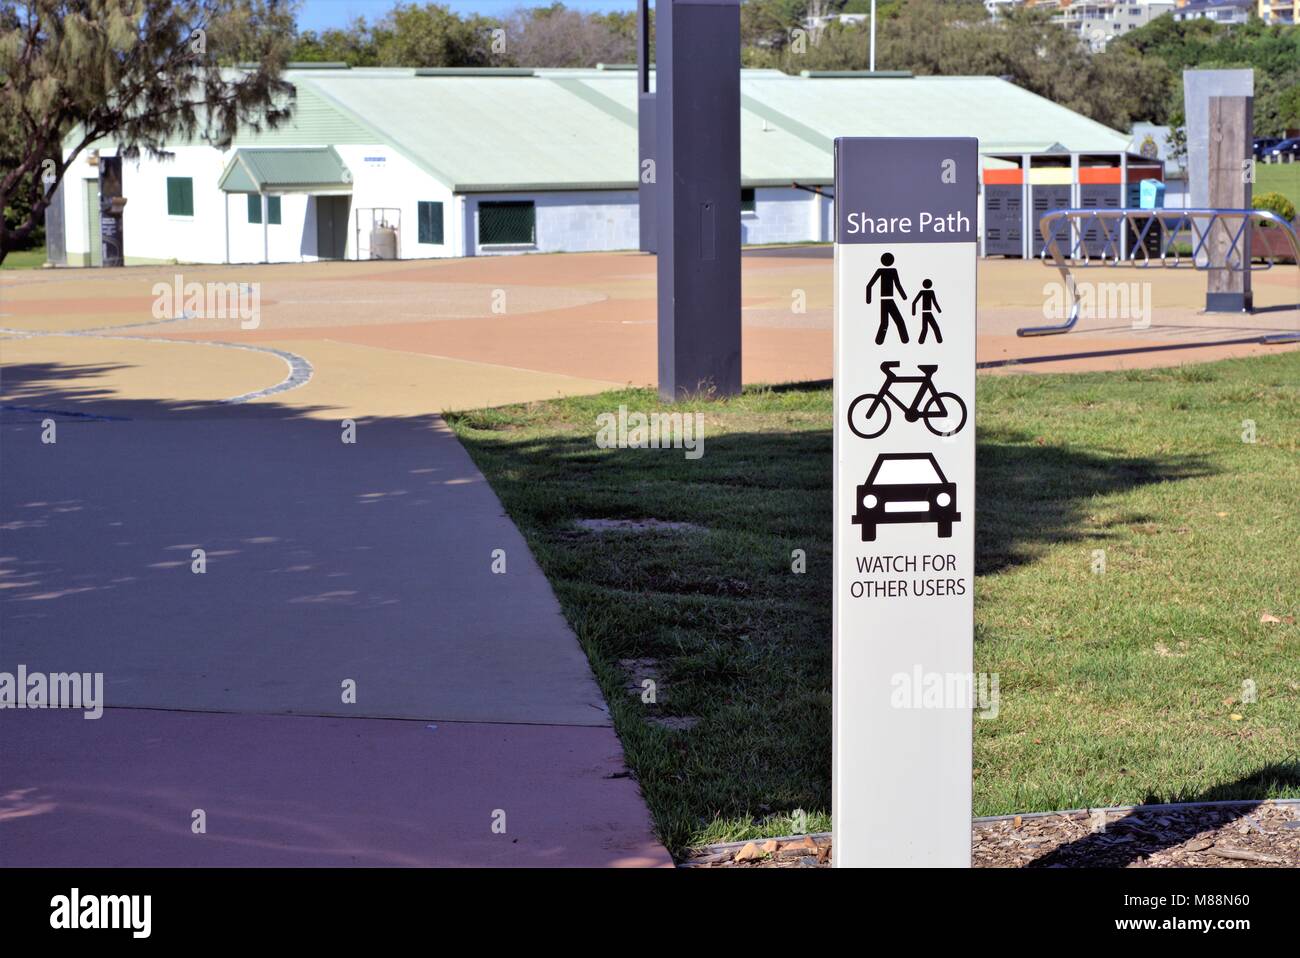 Public information sign post says 'Share Path, Watch for Other Users' at park in Australia. Stock Photo